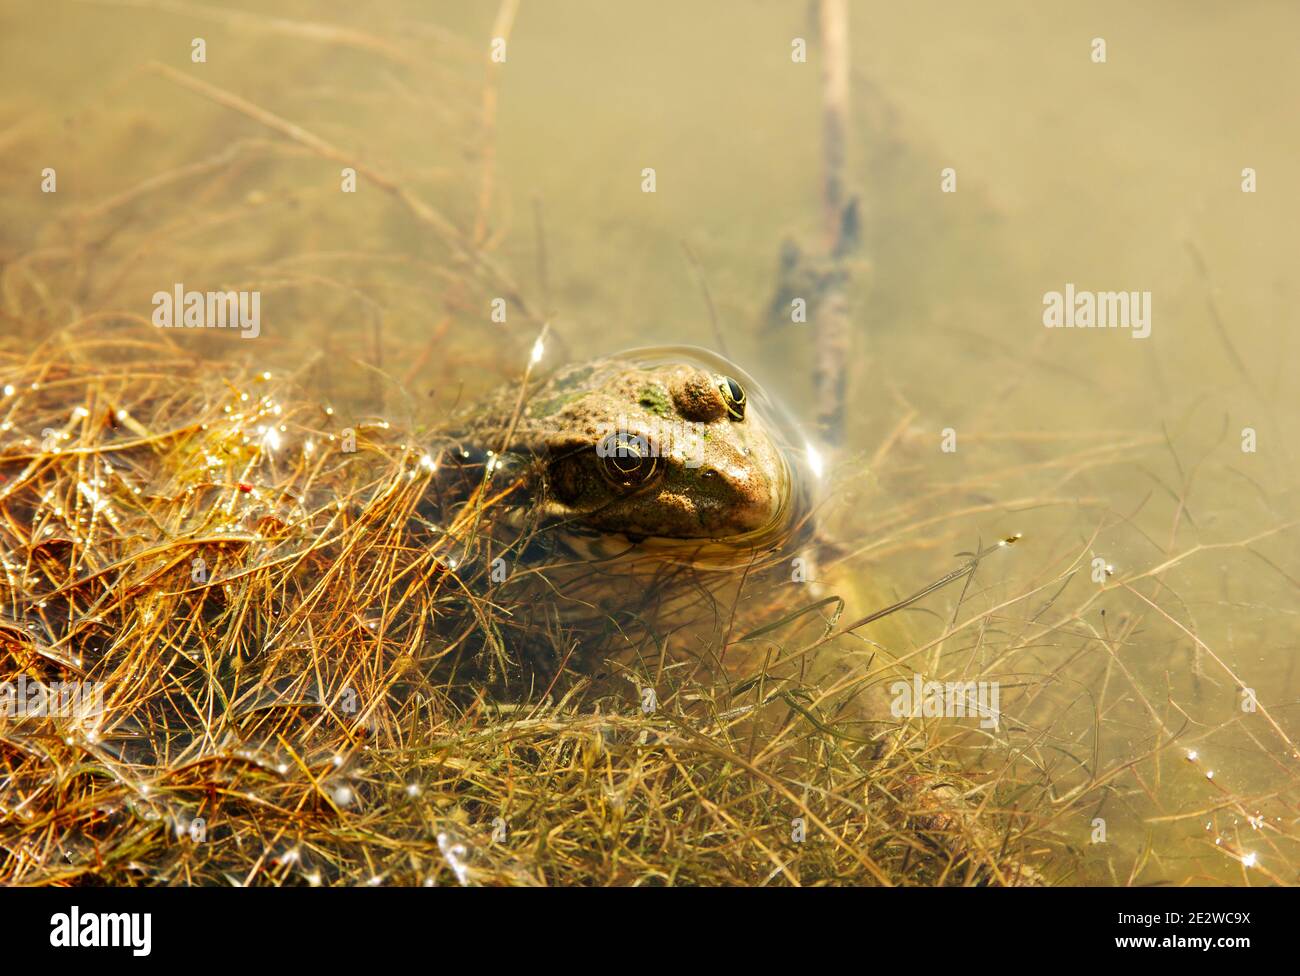 The lake frog in a water. Head of a Marsh frog on a nature habitats background. Pelophylax ridibundus. Ranidae. Animal is resting on a snag Stock Photo